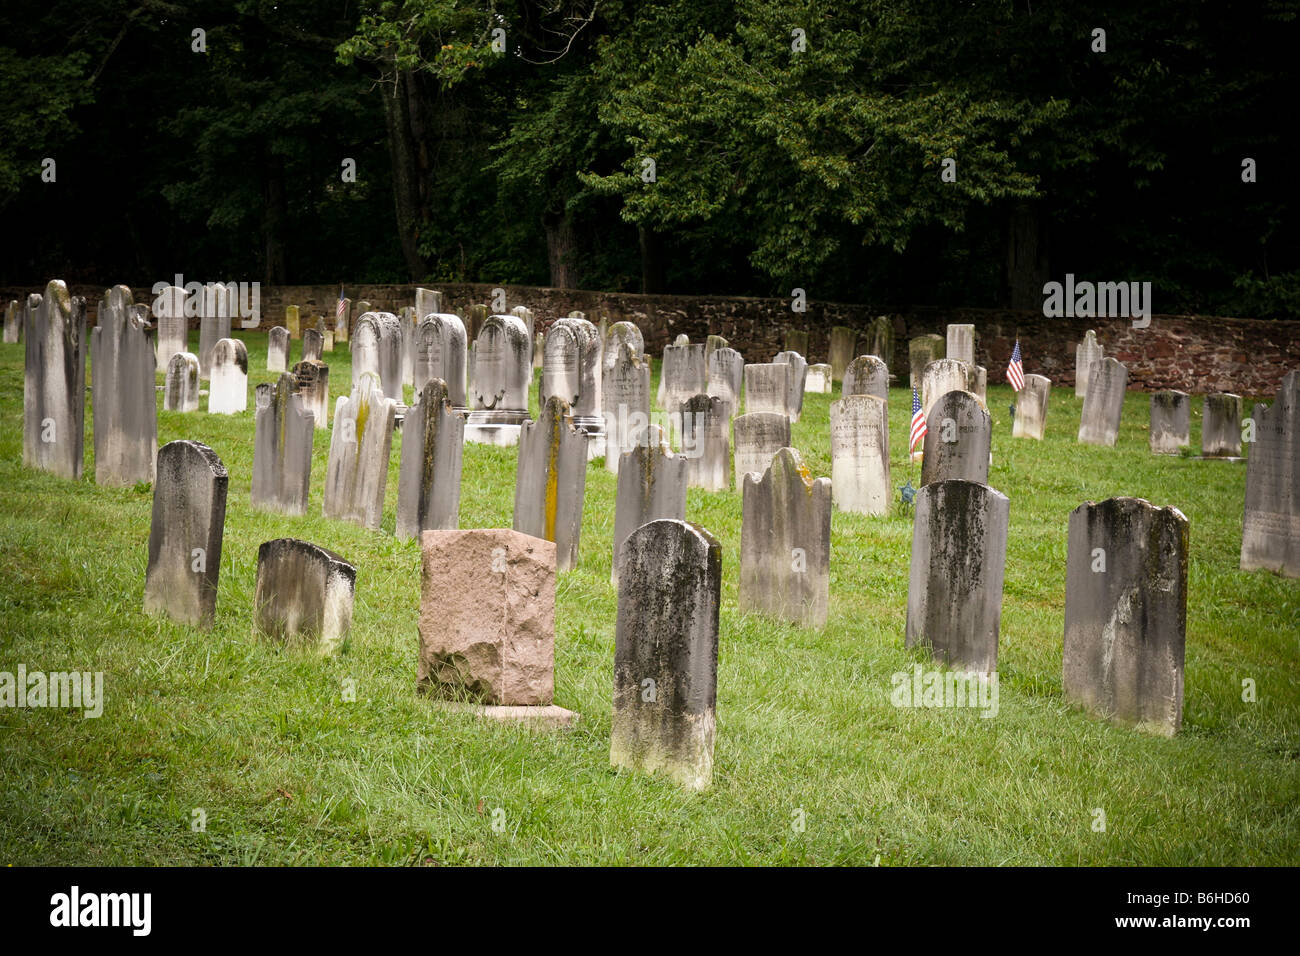 A old early American church grave yard with rows of simple marble grave markers, a stone wall and trees in the background. Stock Photo